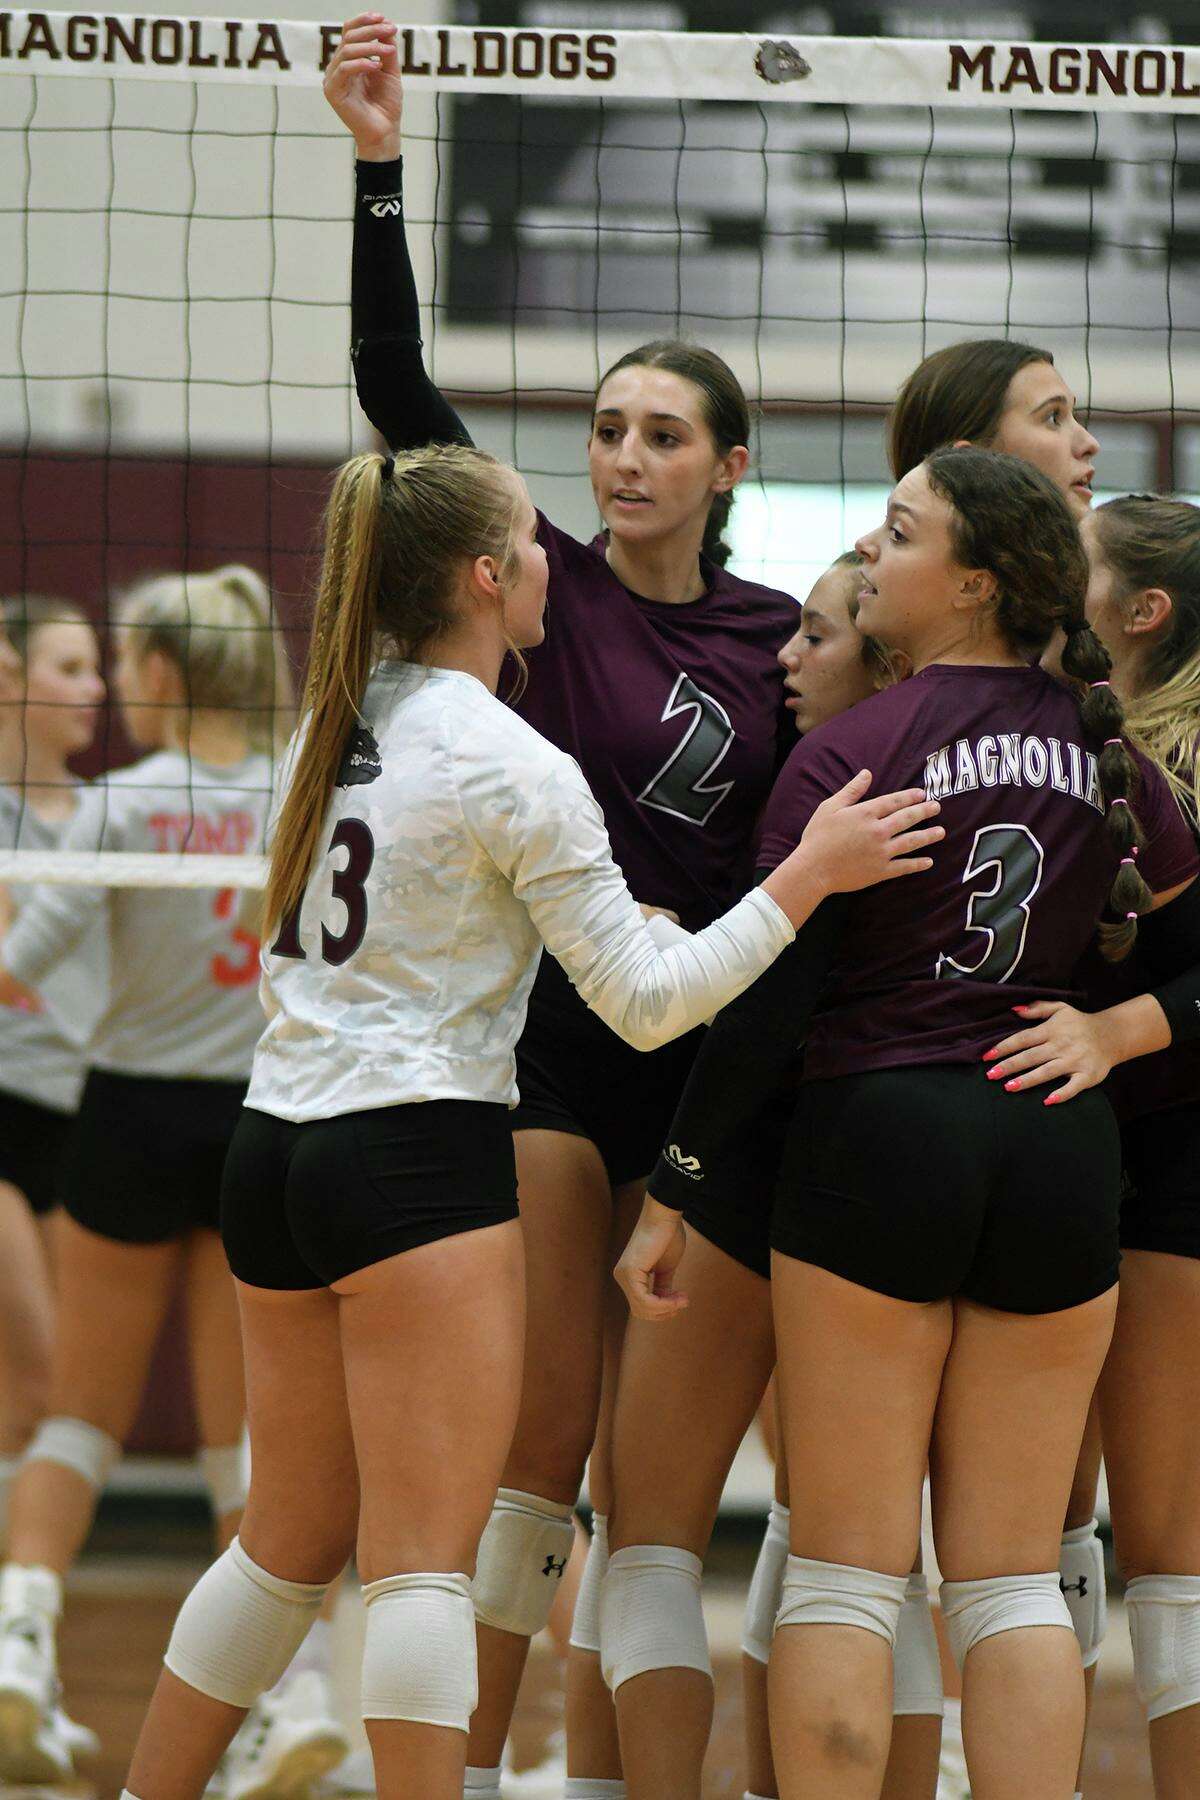 Seen here earlier this season, Magnolia's Ali Gentry (13), Chloe Richards (2) and Kira Braun (3) also contributed in a big way Tuesday night in Magnolia’s win over College Station in five sets.